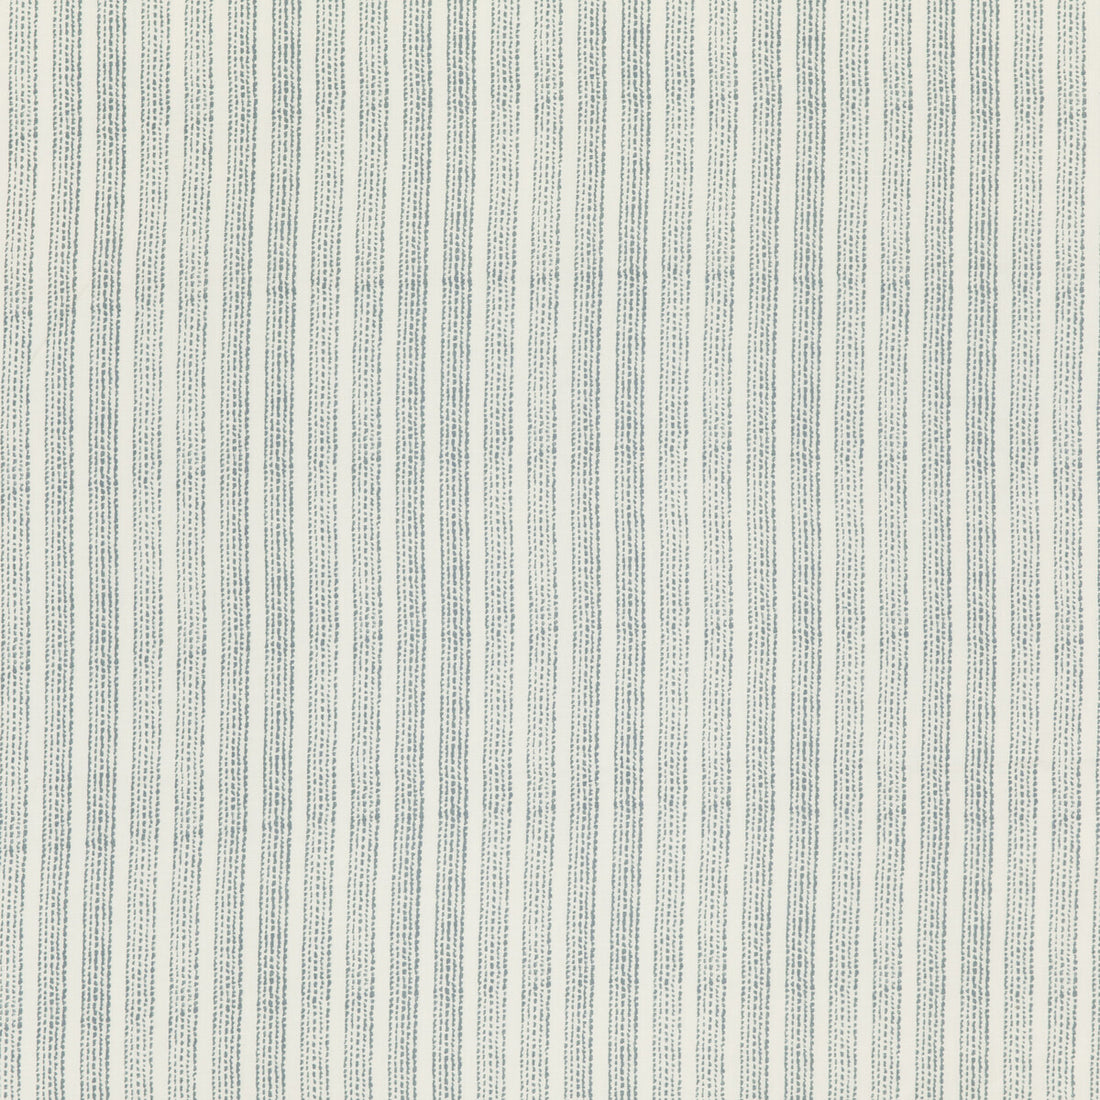 Mimar fabric in blue color - pattern ED75034.4.0 - by Threads in the Moro collection